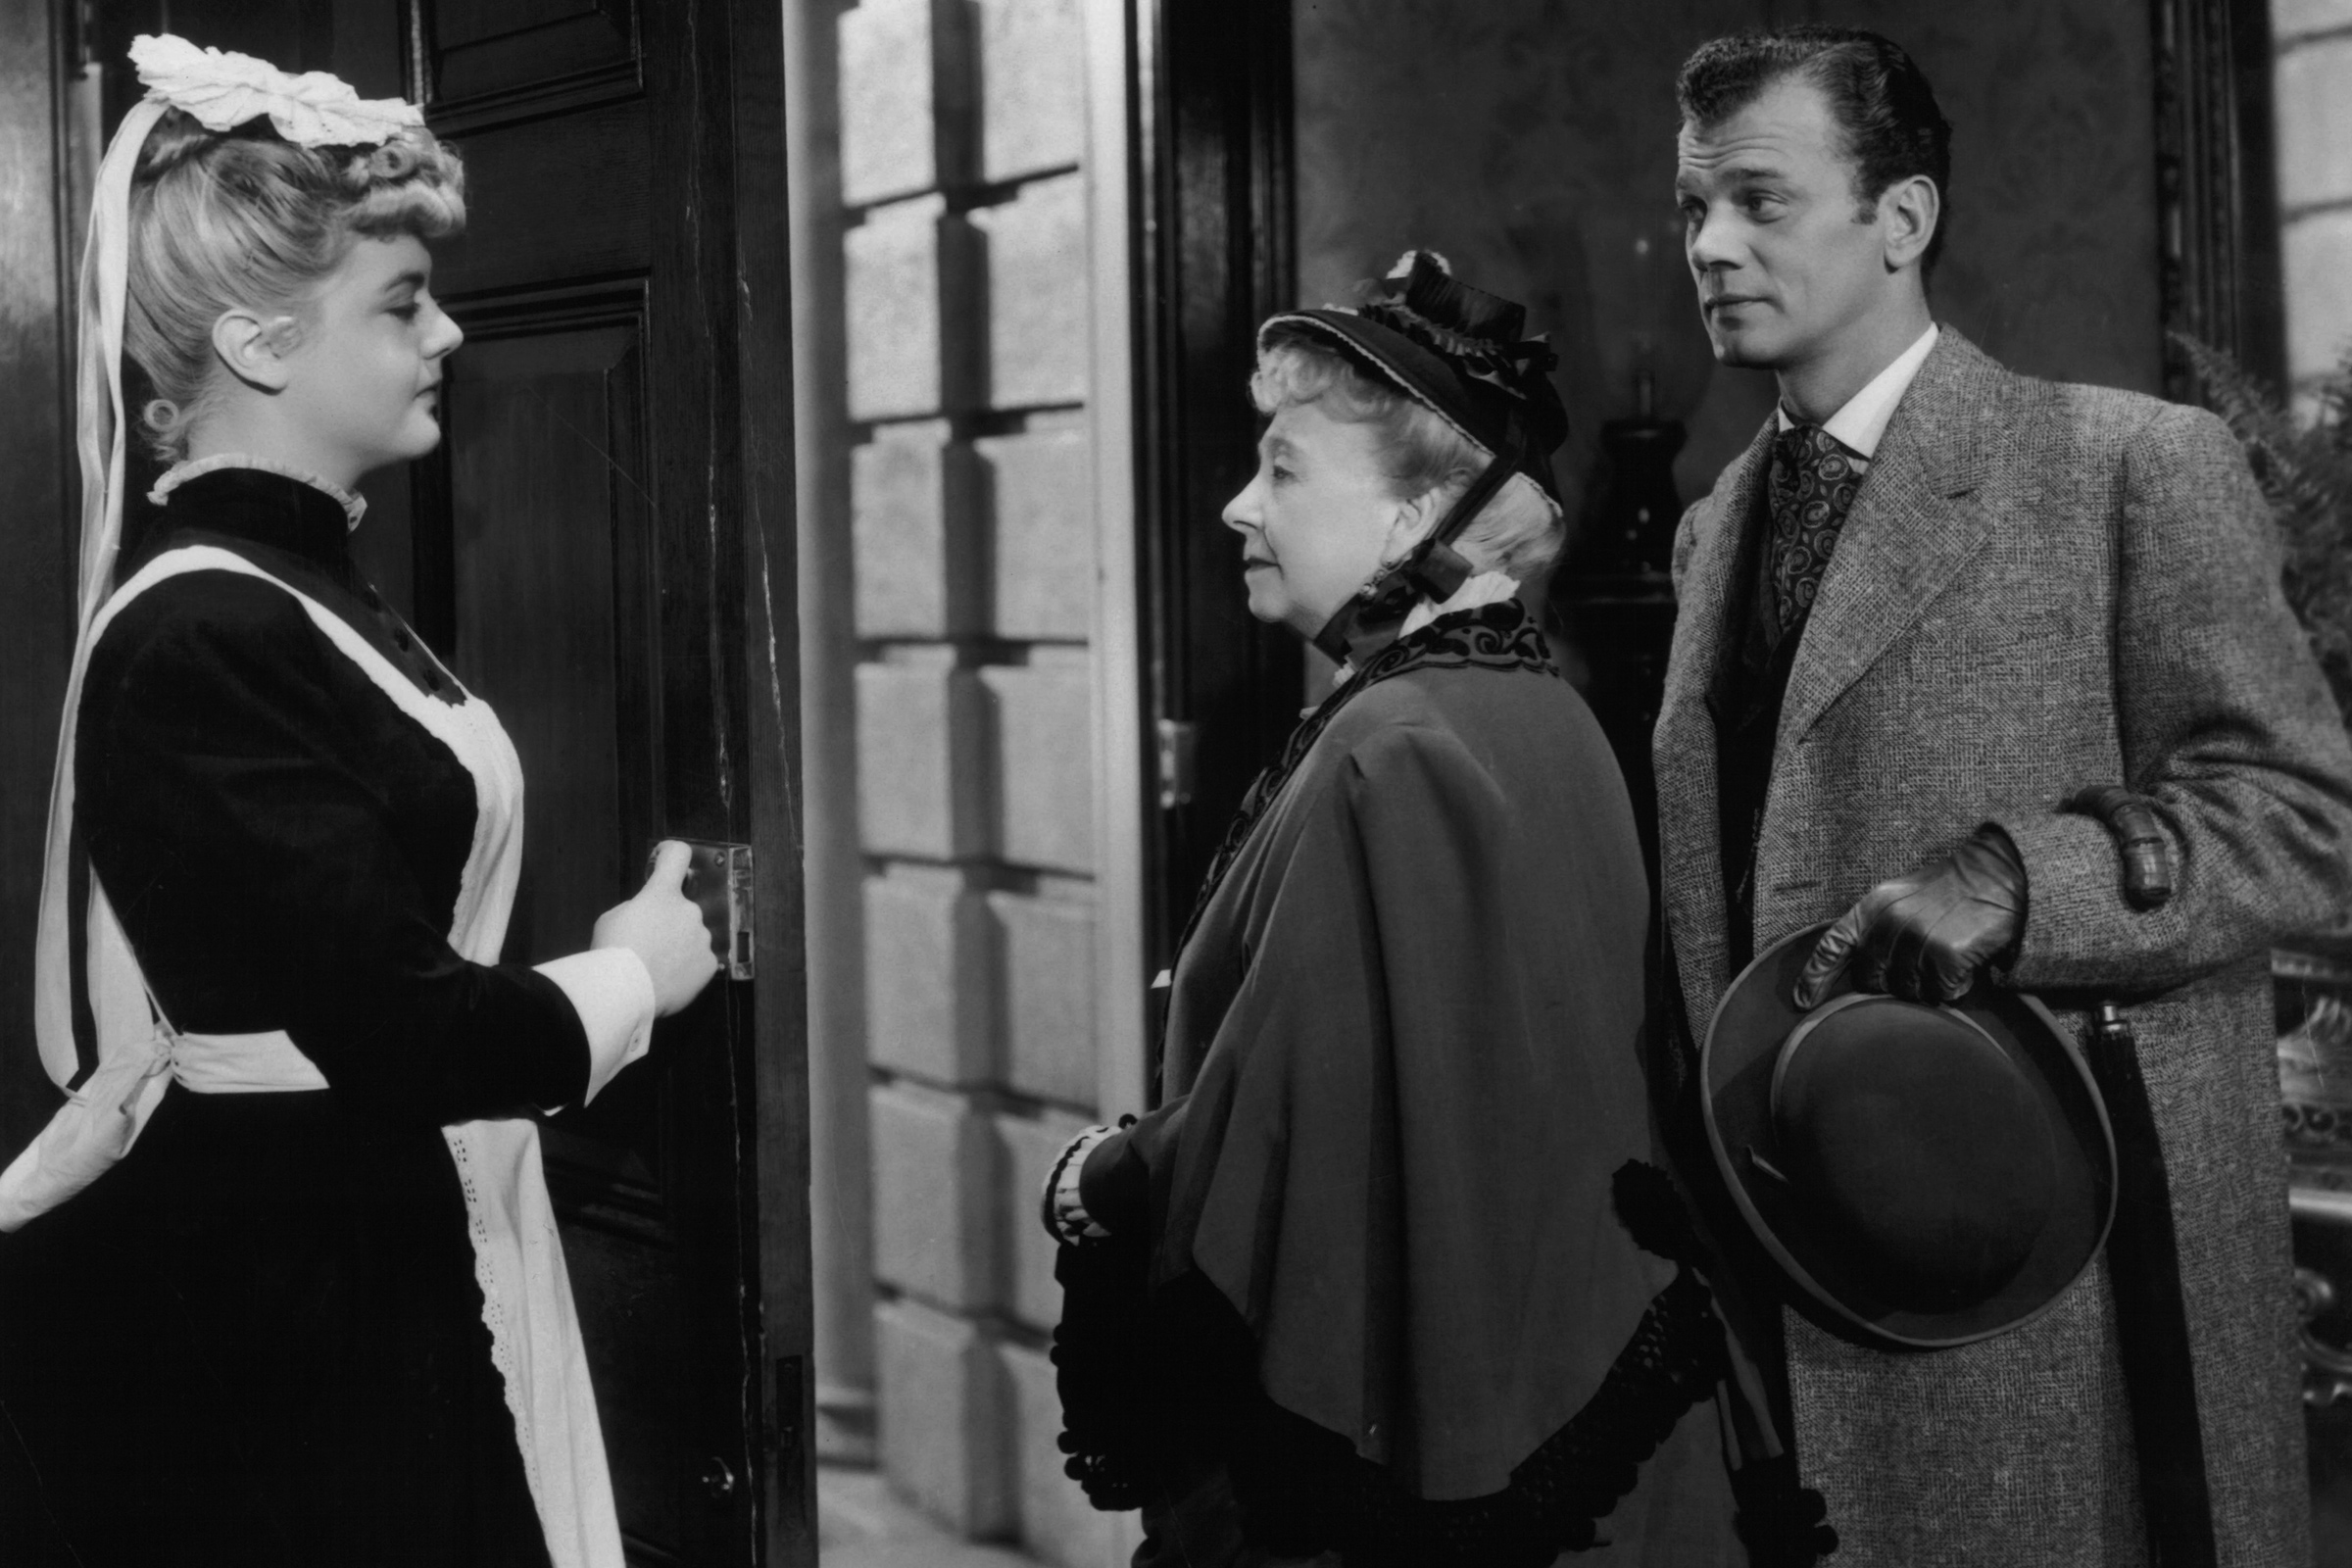 Angela Lansbury opens the door for Dame May Whitty and Joseph Cotten in a scene from the film 'Gaslight', in 1944. (Metro-Goldwyn-Mayer/Getty Images)